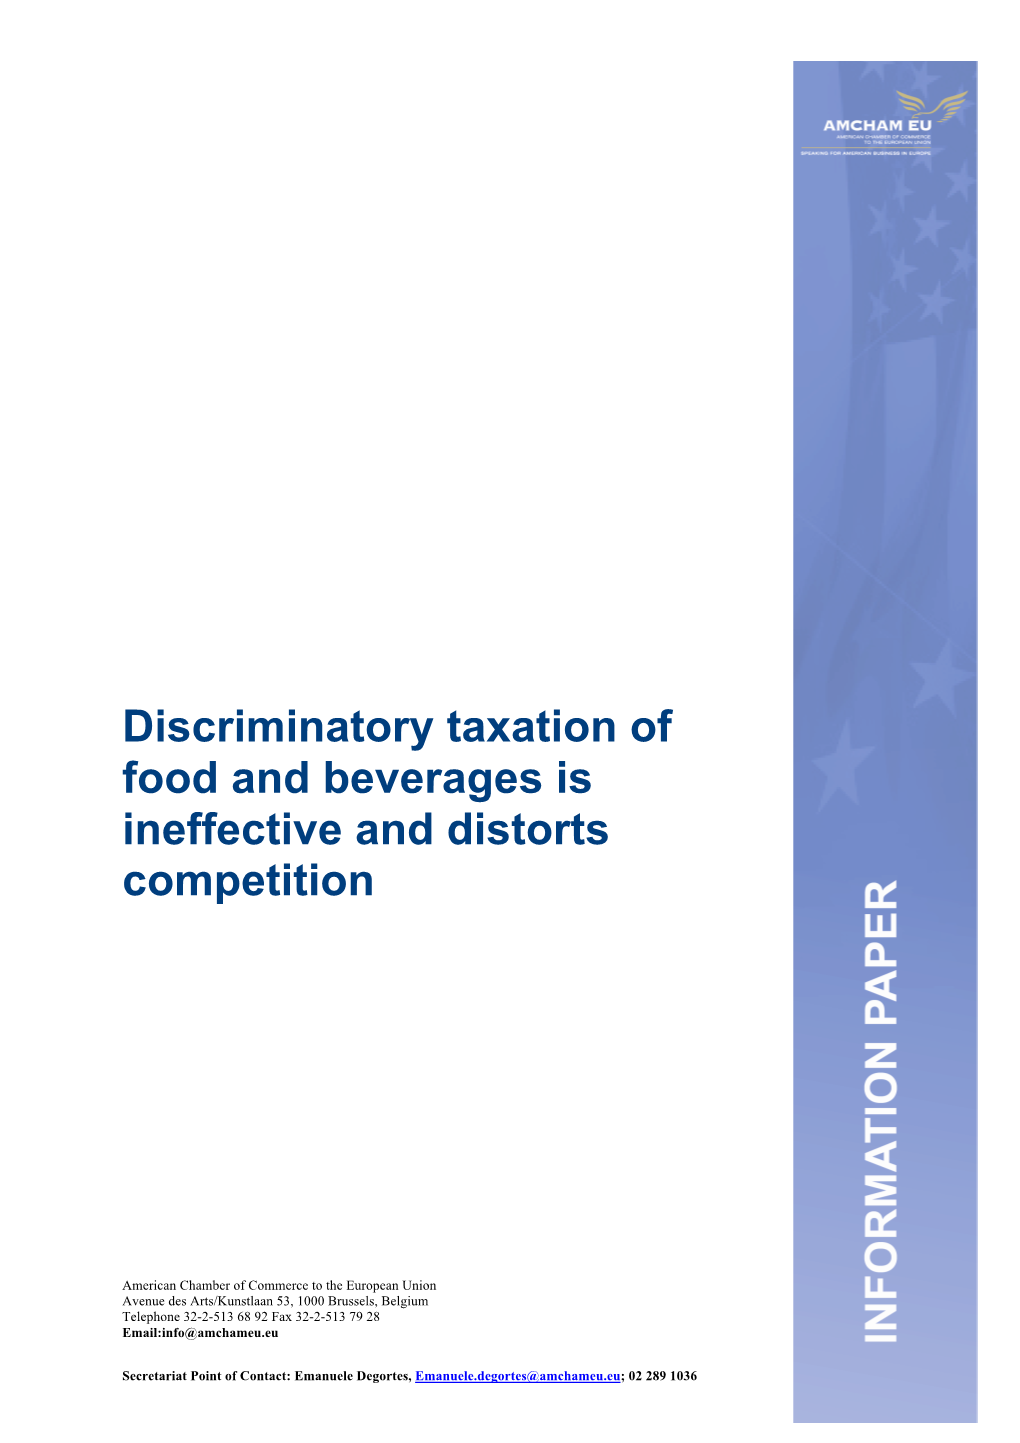 Discriminatory Taxation of Food and Beverages Is Ineffective and Distorts Competition